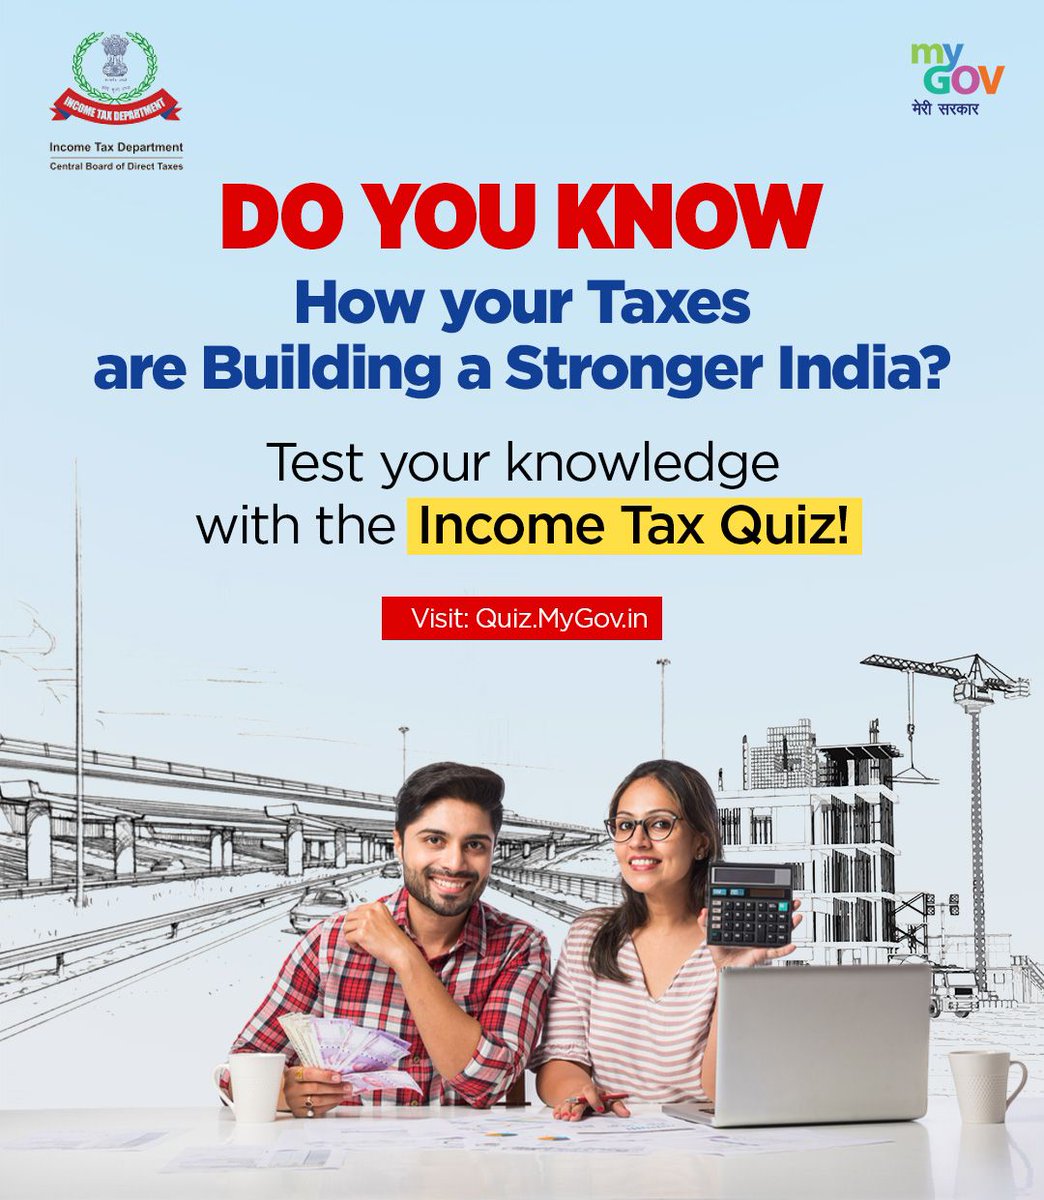 Enhance your tax knowledge with the Income Tax Quiz on #MyGov! Stay informed and make smarter tax decisions today. Visit: quiz.mygov.in/quiz/income-ta… #NewIndia #IT @IncomeTaxIndia